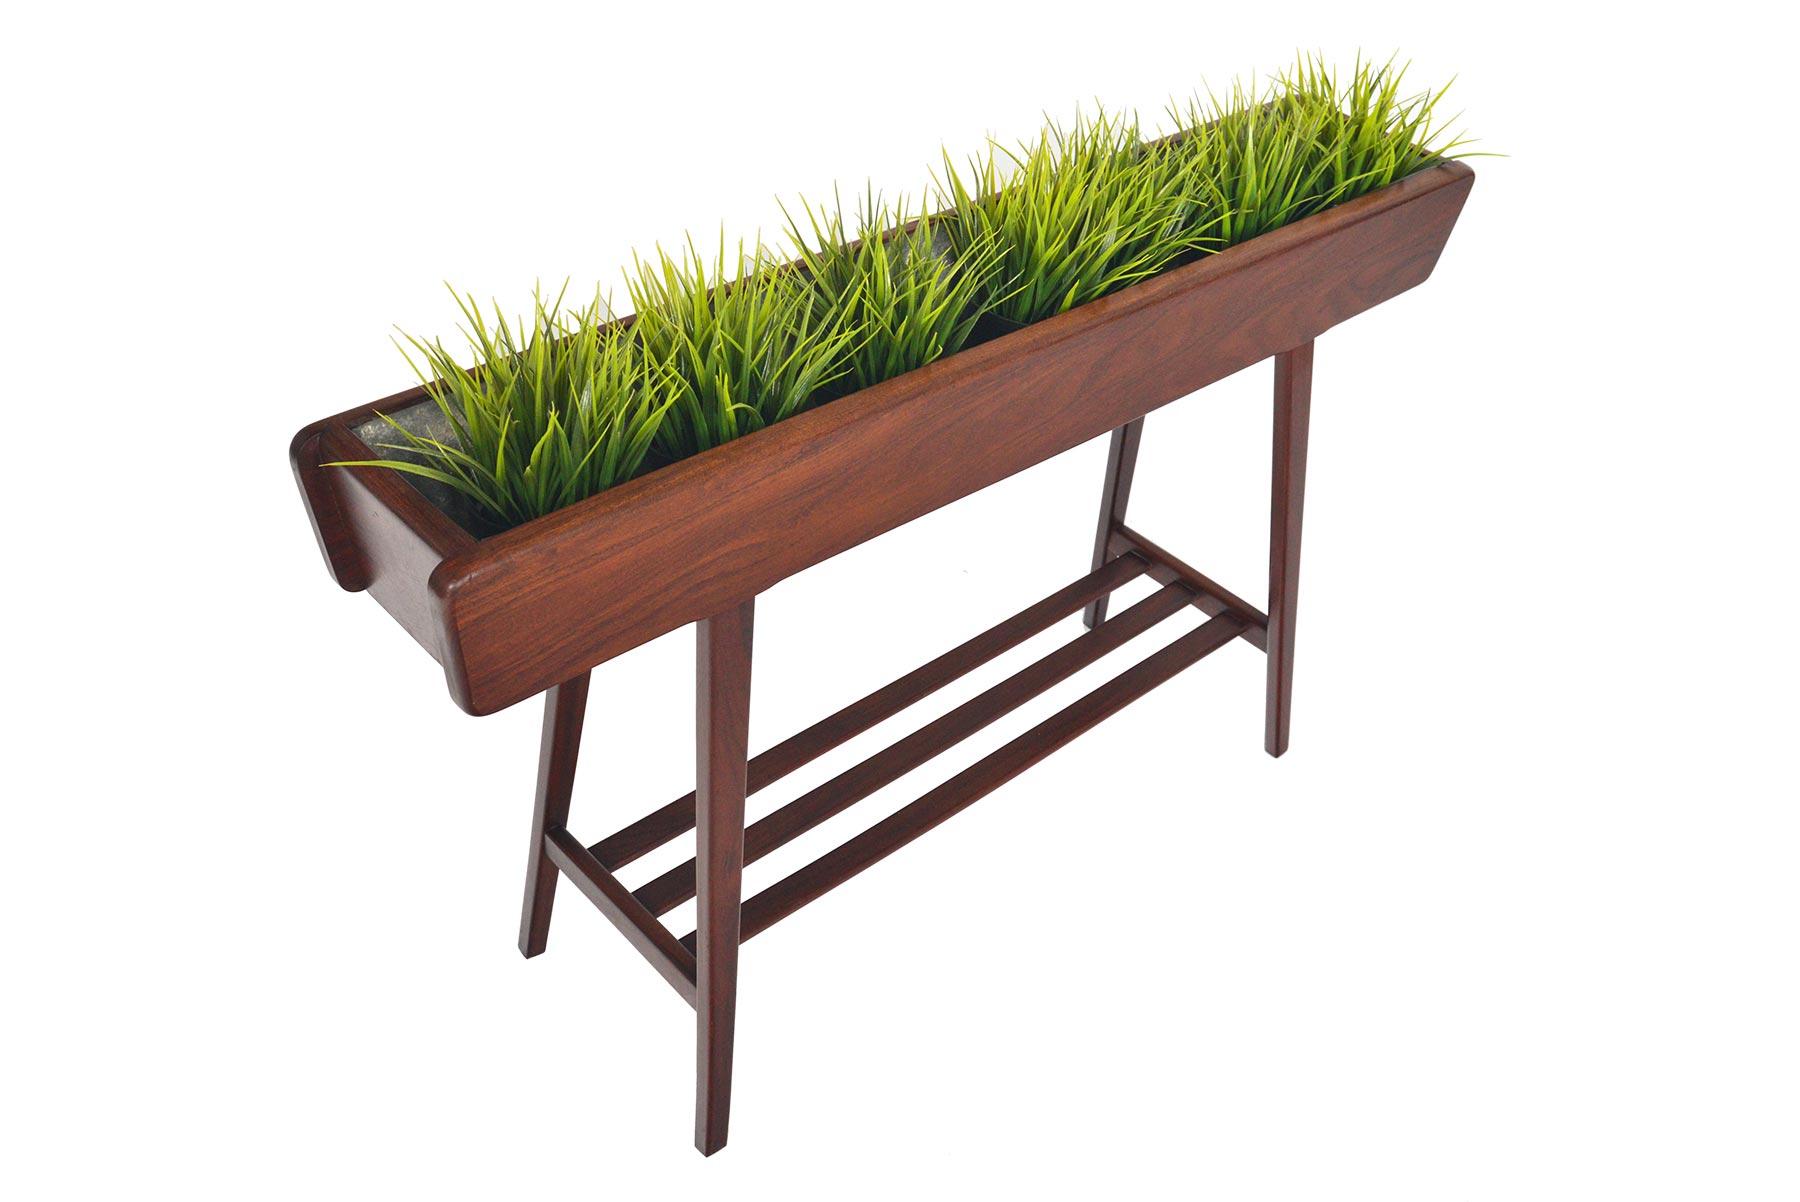 Tall and atomic, this Danish modern teak planter is the perfect piece to elevate your indoor gardening! Organic angles and canted legs offer a dramatic Silhouette from every angle. In excellent original condition with typical wear for its